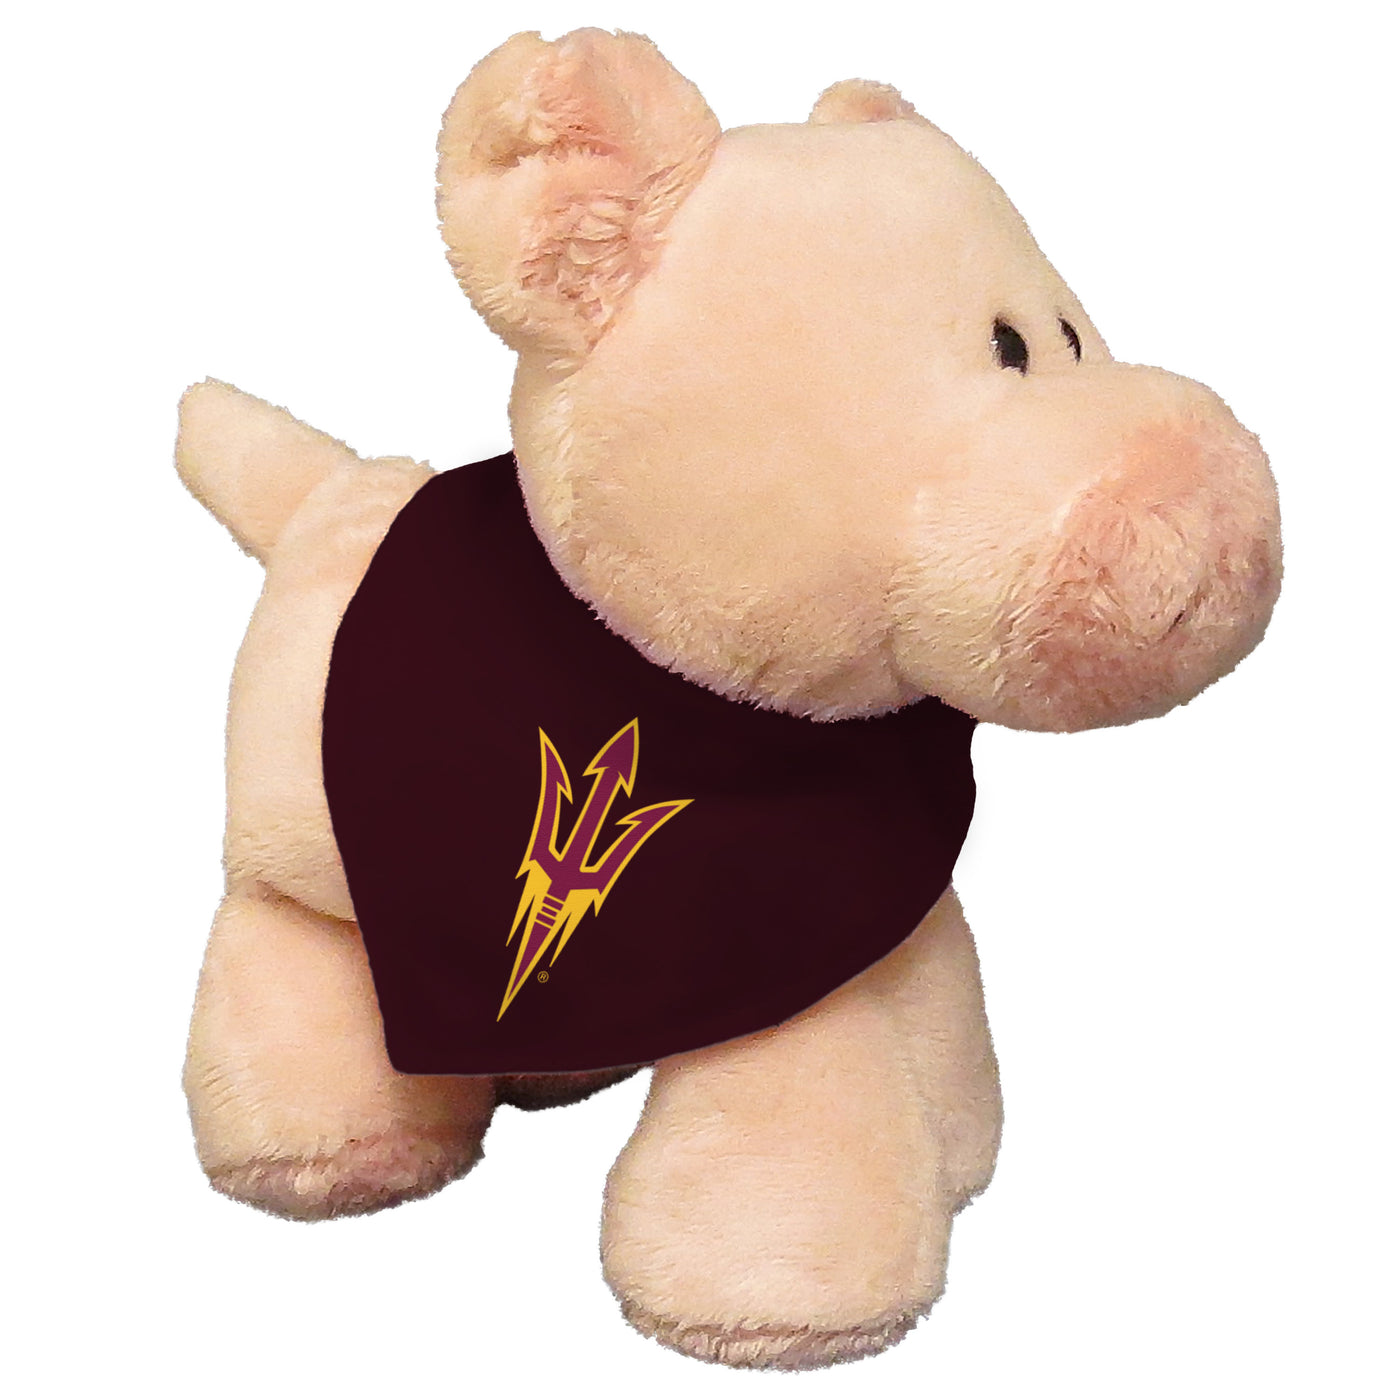 ASU stuffed pink pig wearing a maroon bandanna around its neck that features the pitchfork logo